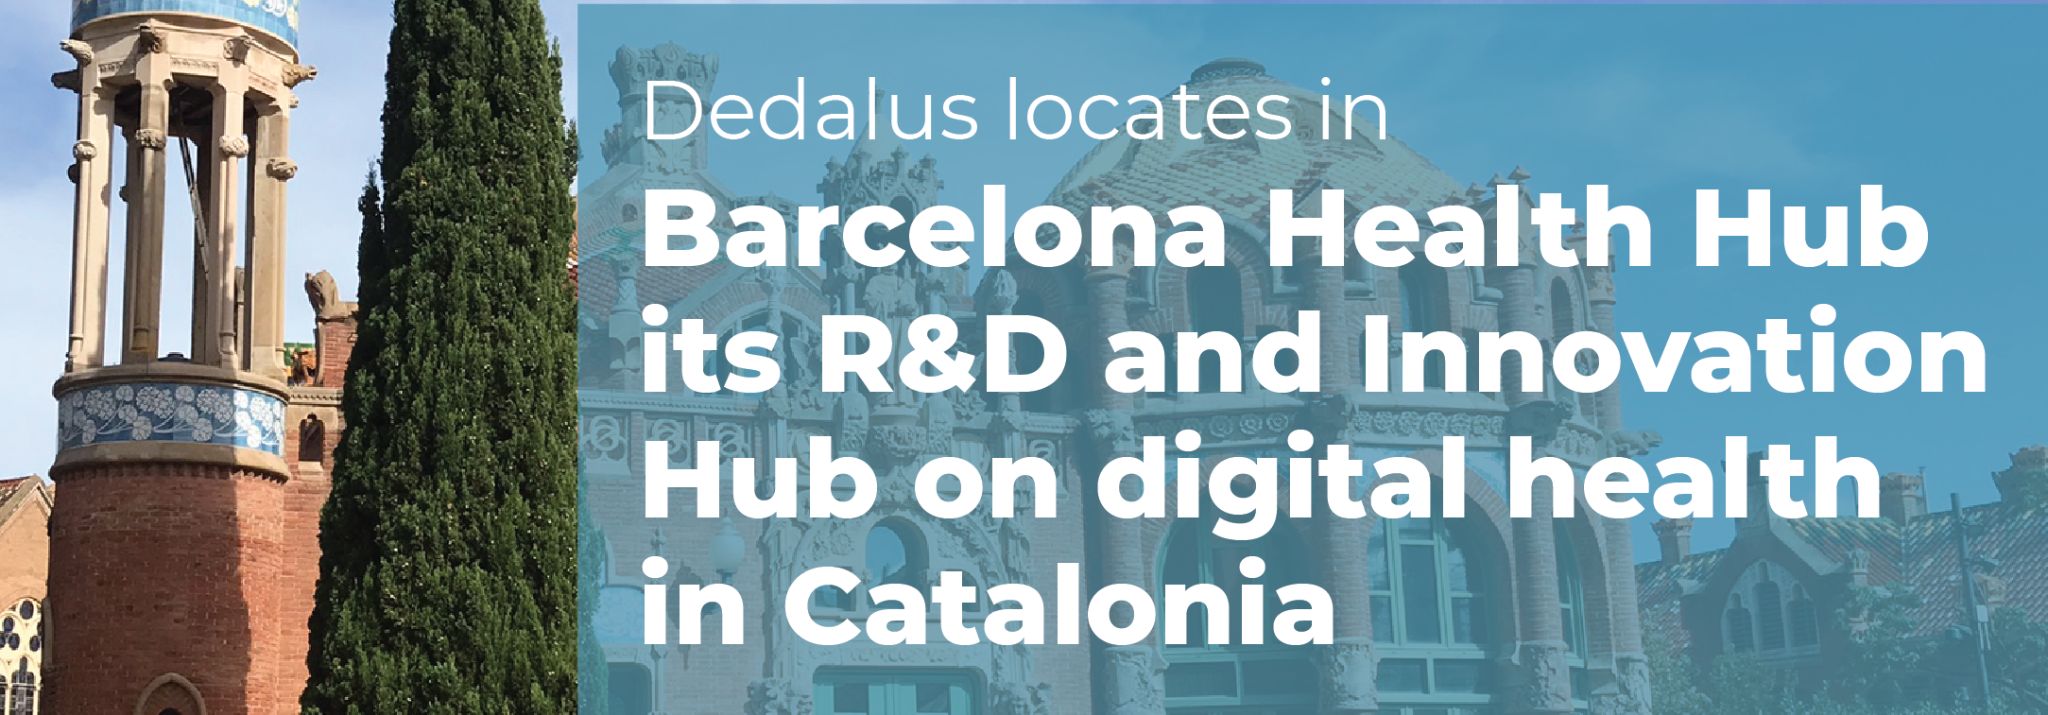 Dedalus locates in Barcelona Health Hub its R&D and Innovation Hub on digital health in Catalonia